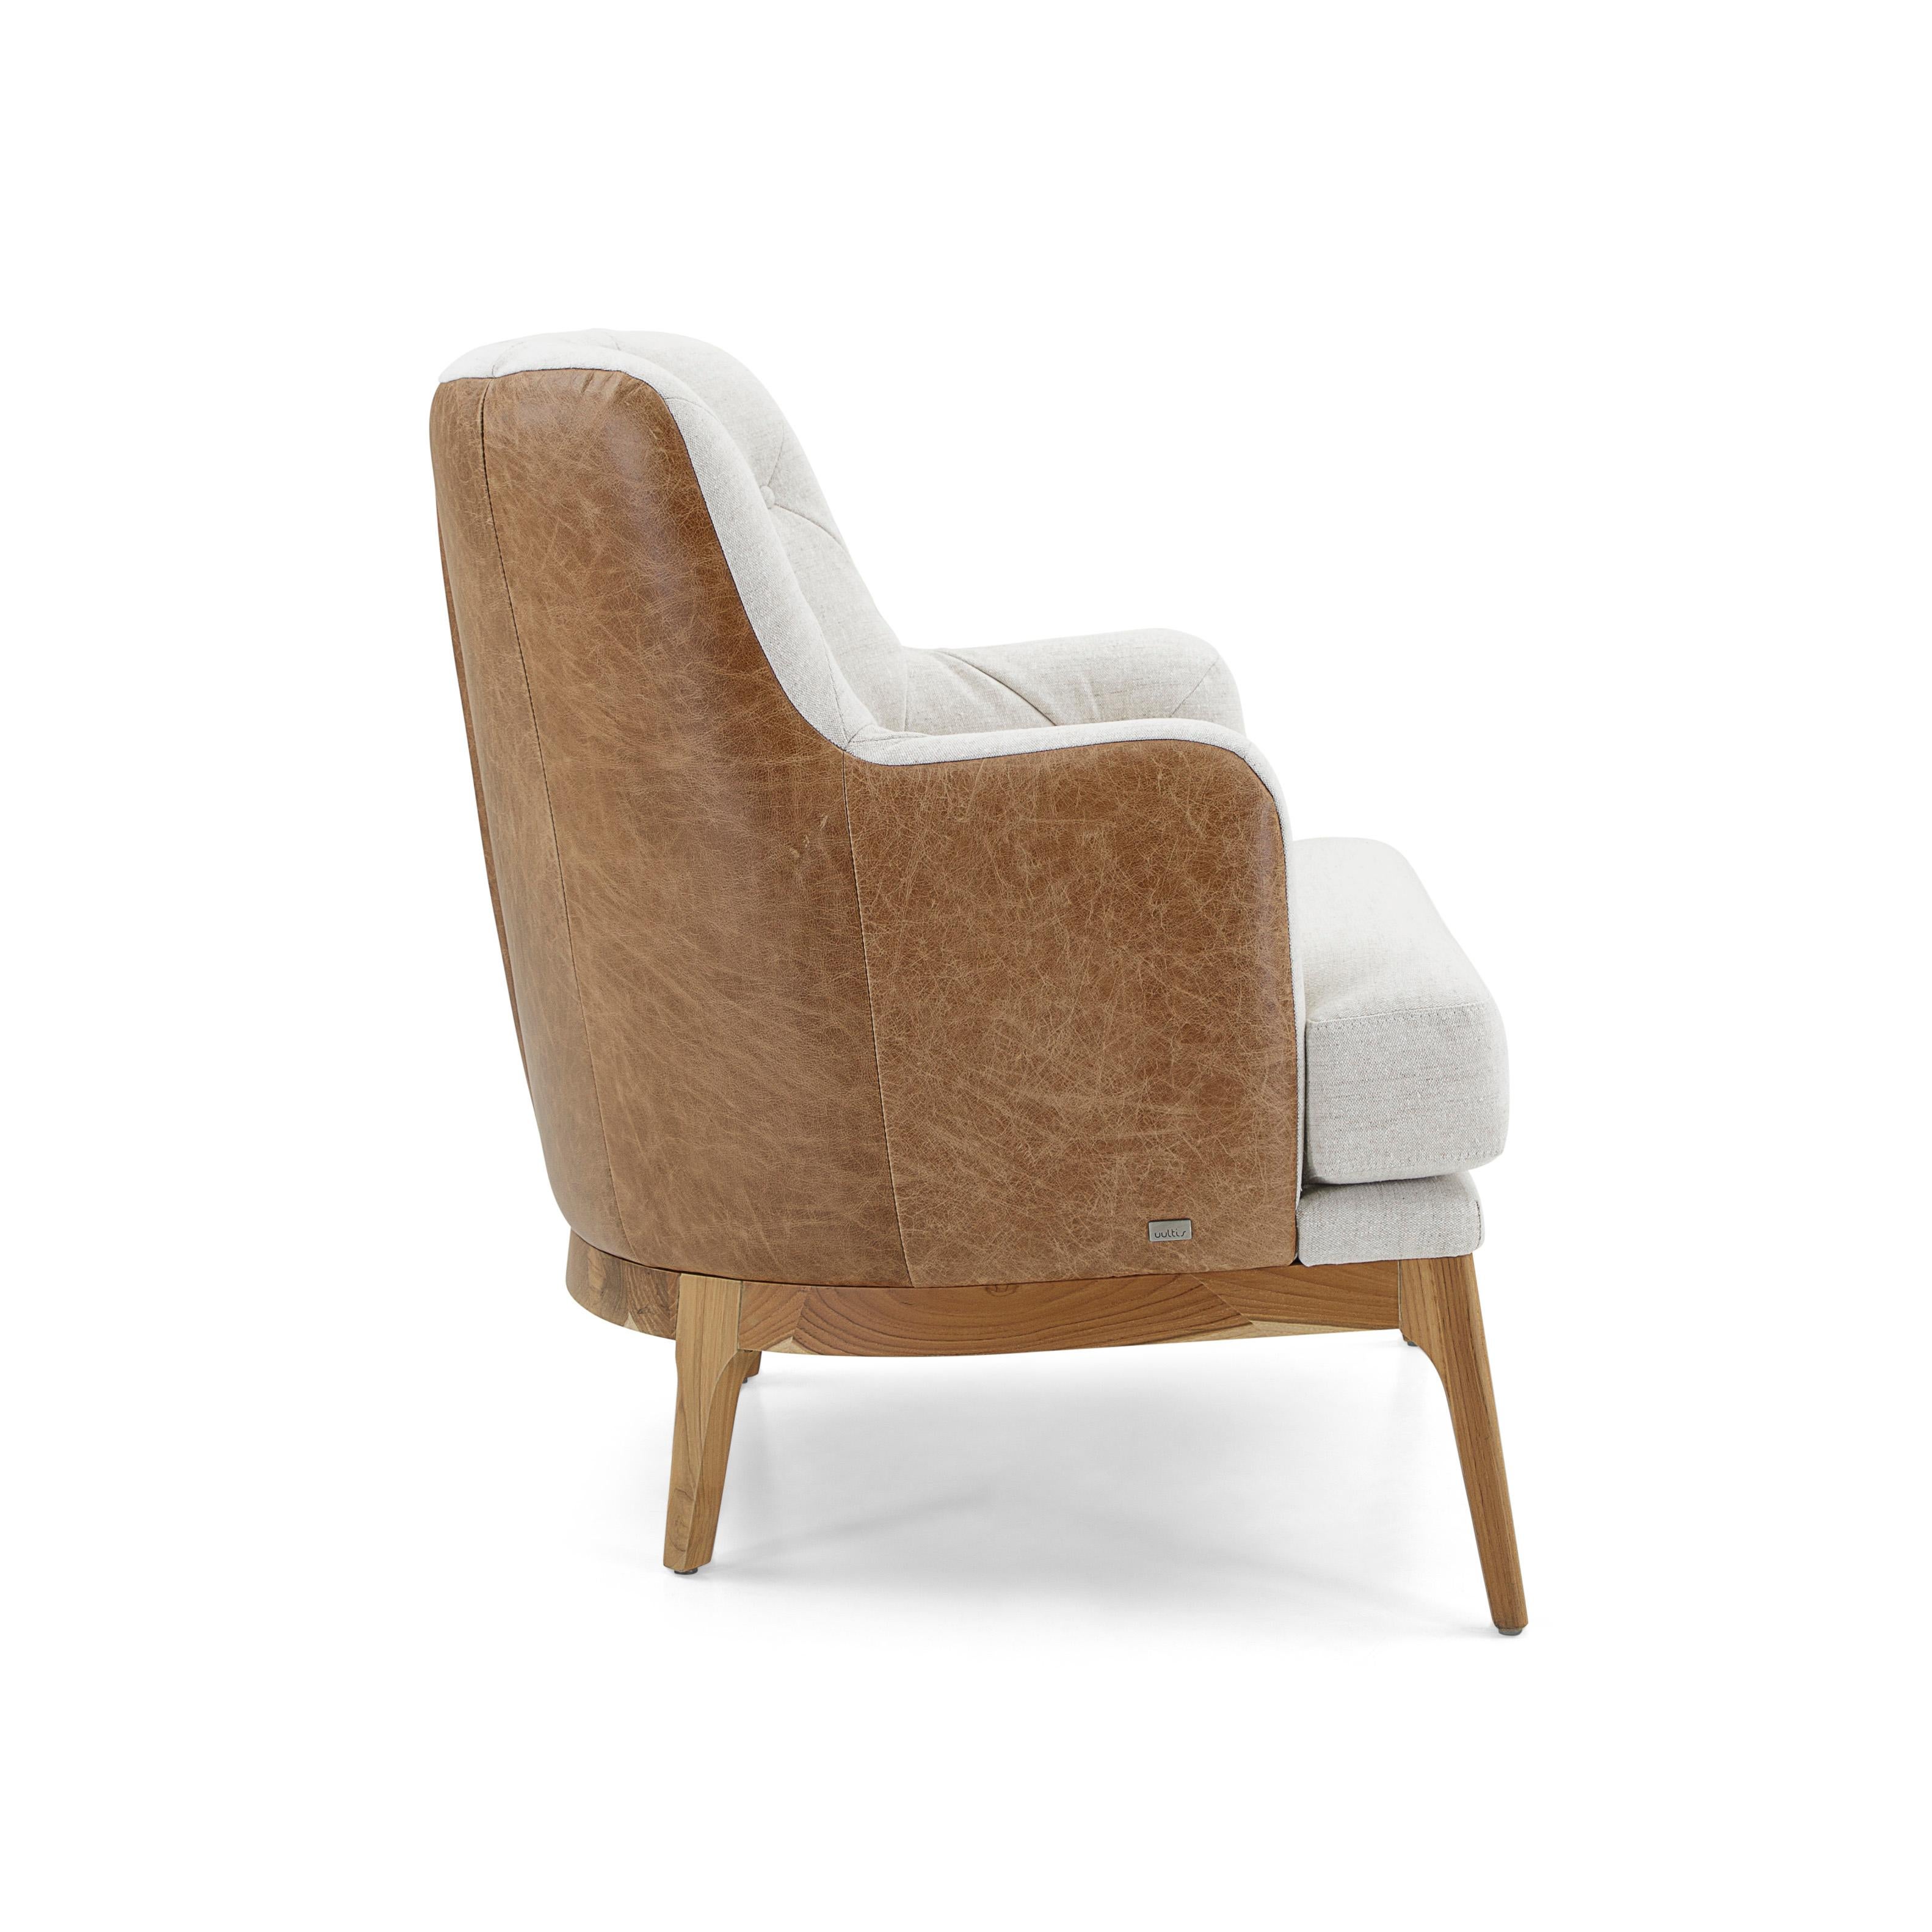 The Athos armchair is upholstered on the outside back and sides in a gorgeous brown distressed leather while the chair interior is covered in a beautiful ivory colored fabric and legs made of wood in a teak wood finish. This chair has been designed